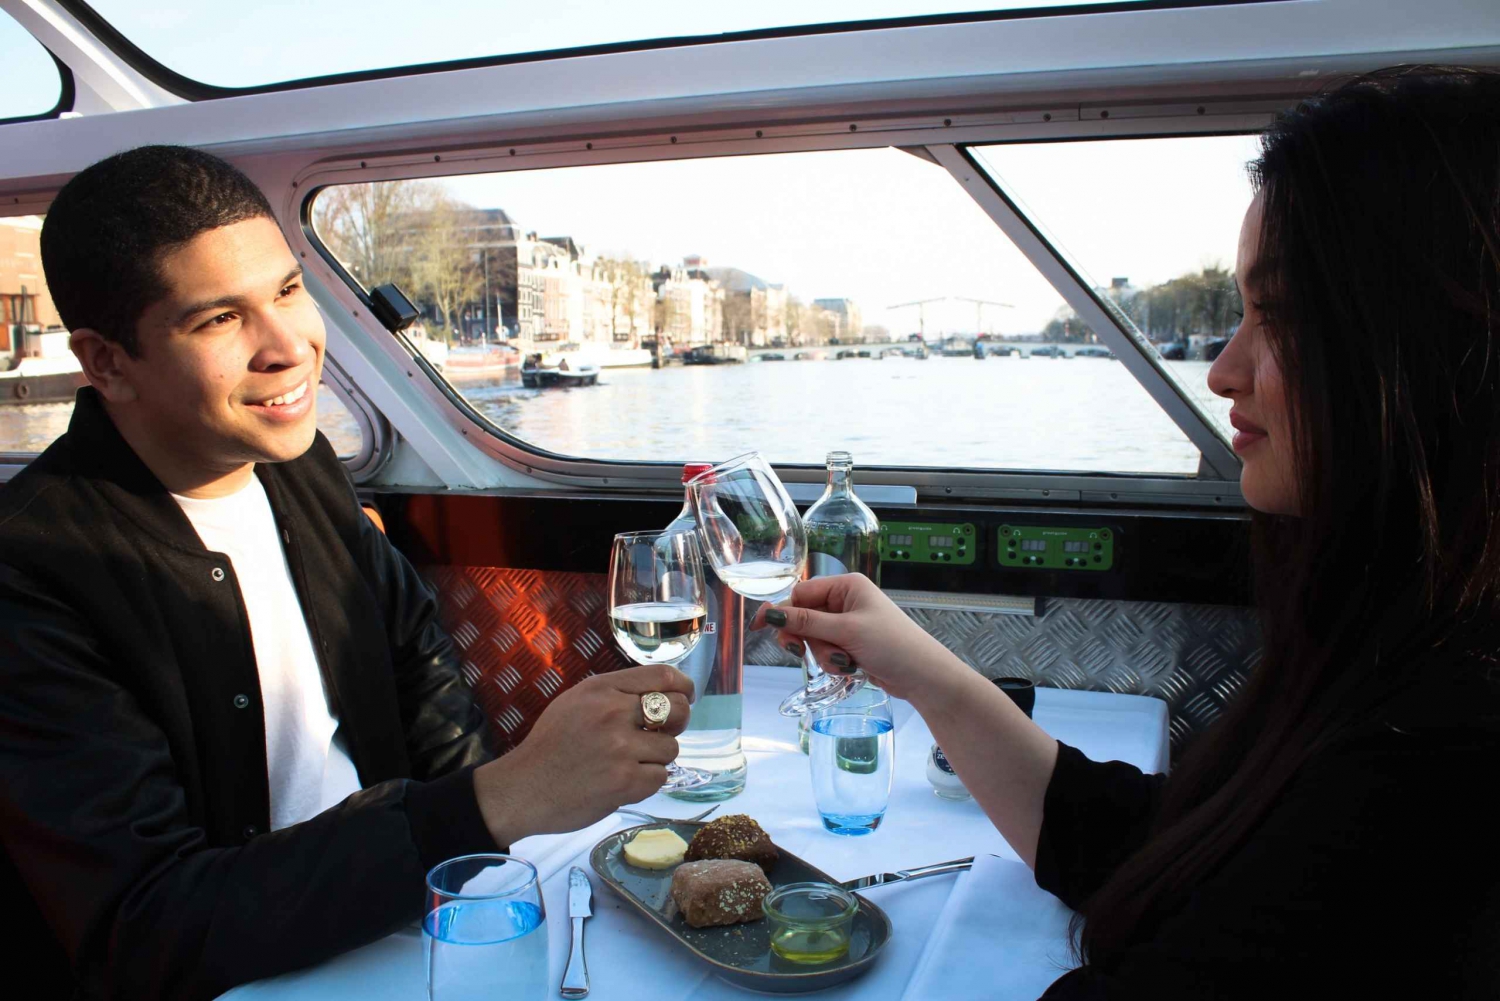 Amsterdam: Dinner Cruise with 3-Course Menu